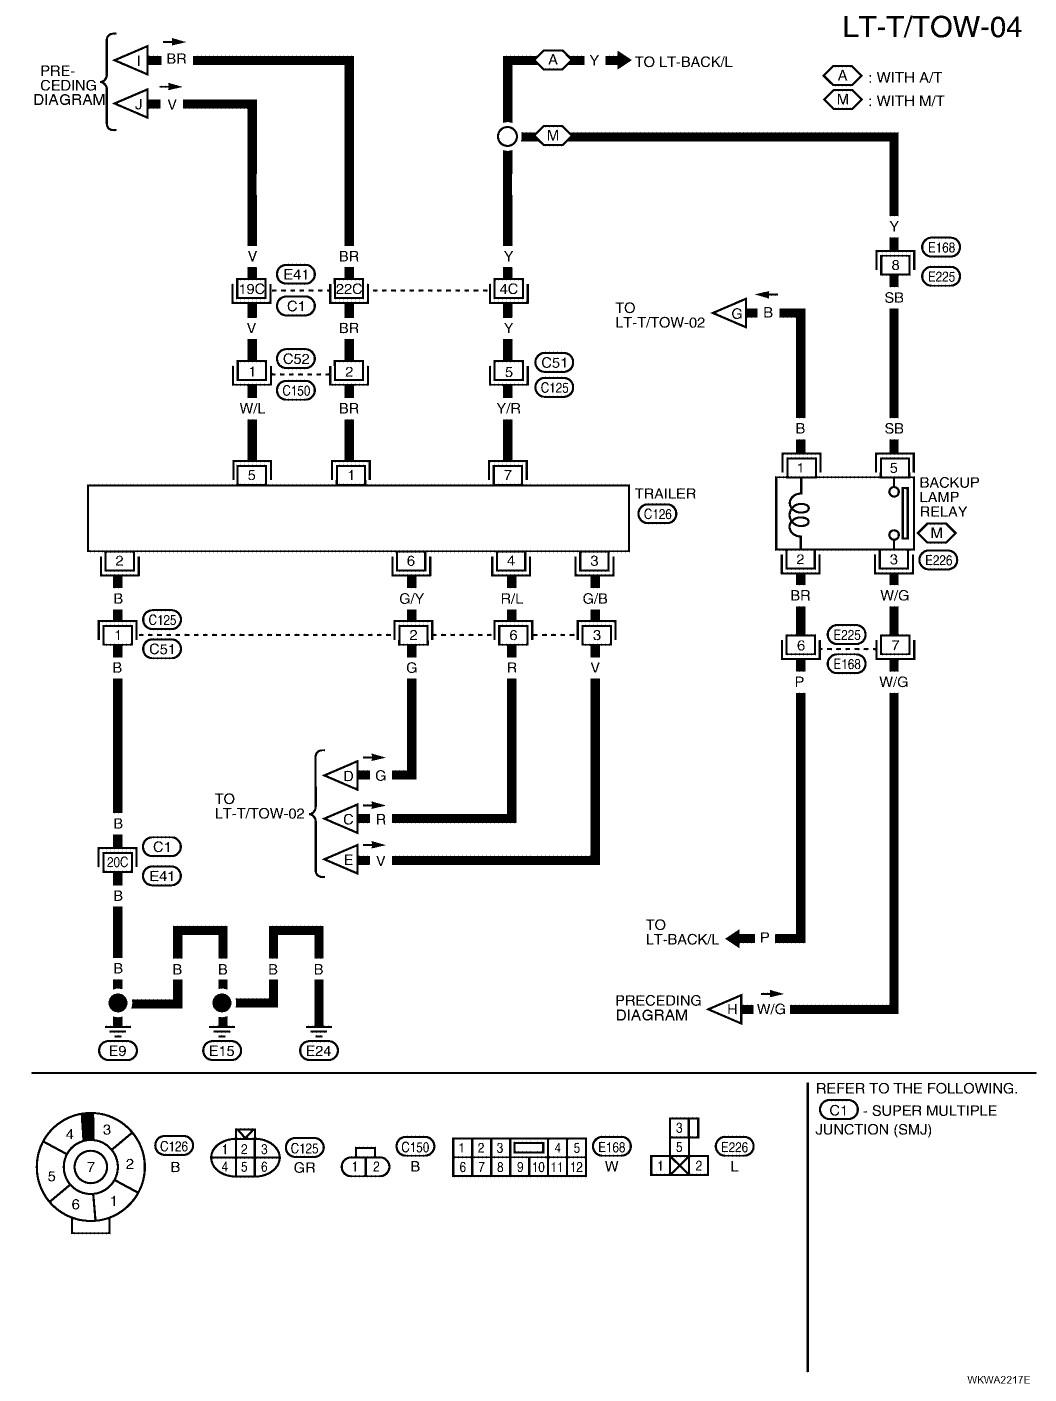 2005 Nissan Frontier Le 4.0 Wiring Diagram I Have A 2005 Nissan Frontier with A Factory Installed Trailer Wiring Harness Problem is Left Of 2005 Nissan Frontier Le 4.0 Wiring Diagram